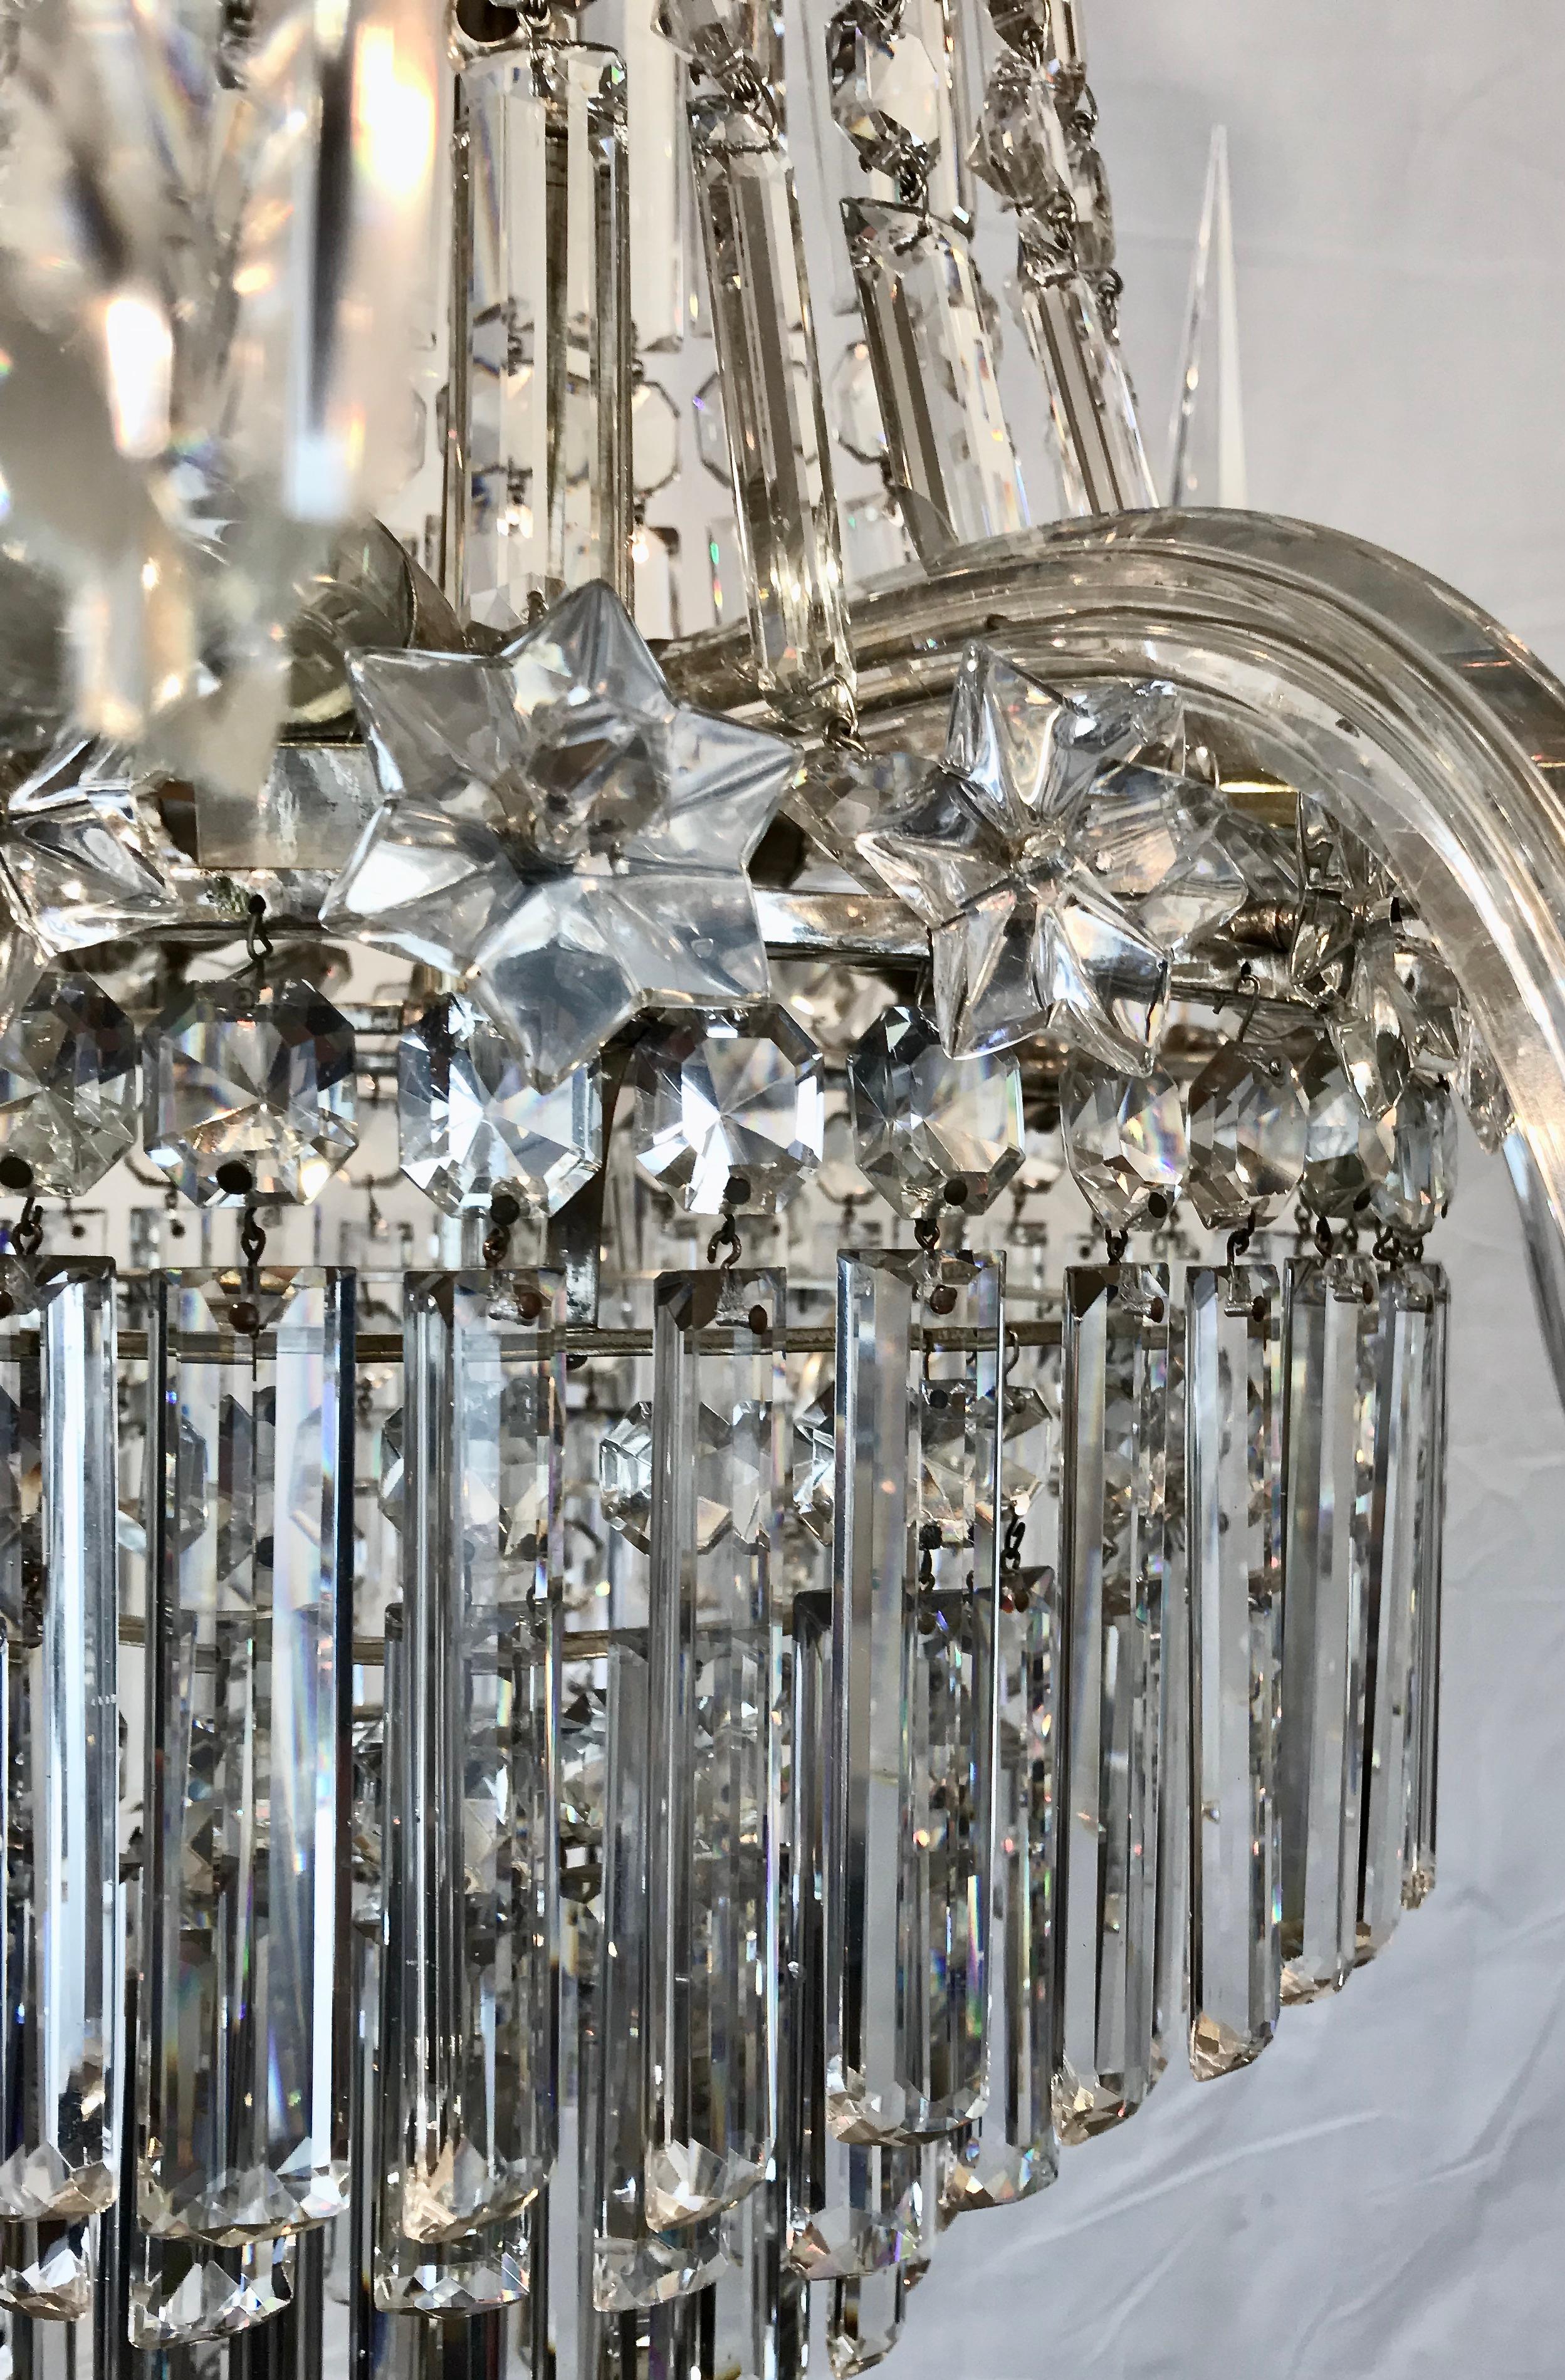 This signed F. & C. Osler chandelier of Classic tent and waterfall design is of the finest quality, featuring lapidary or 